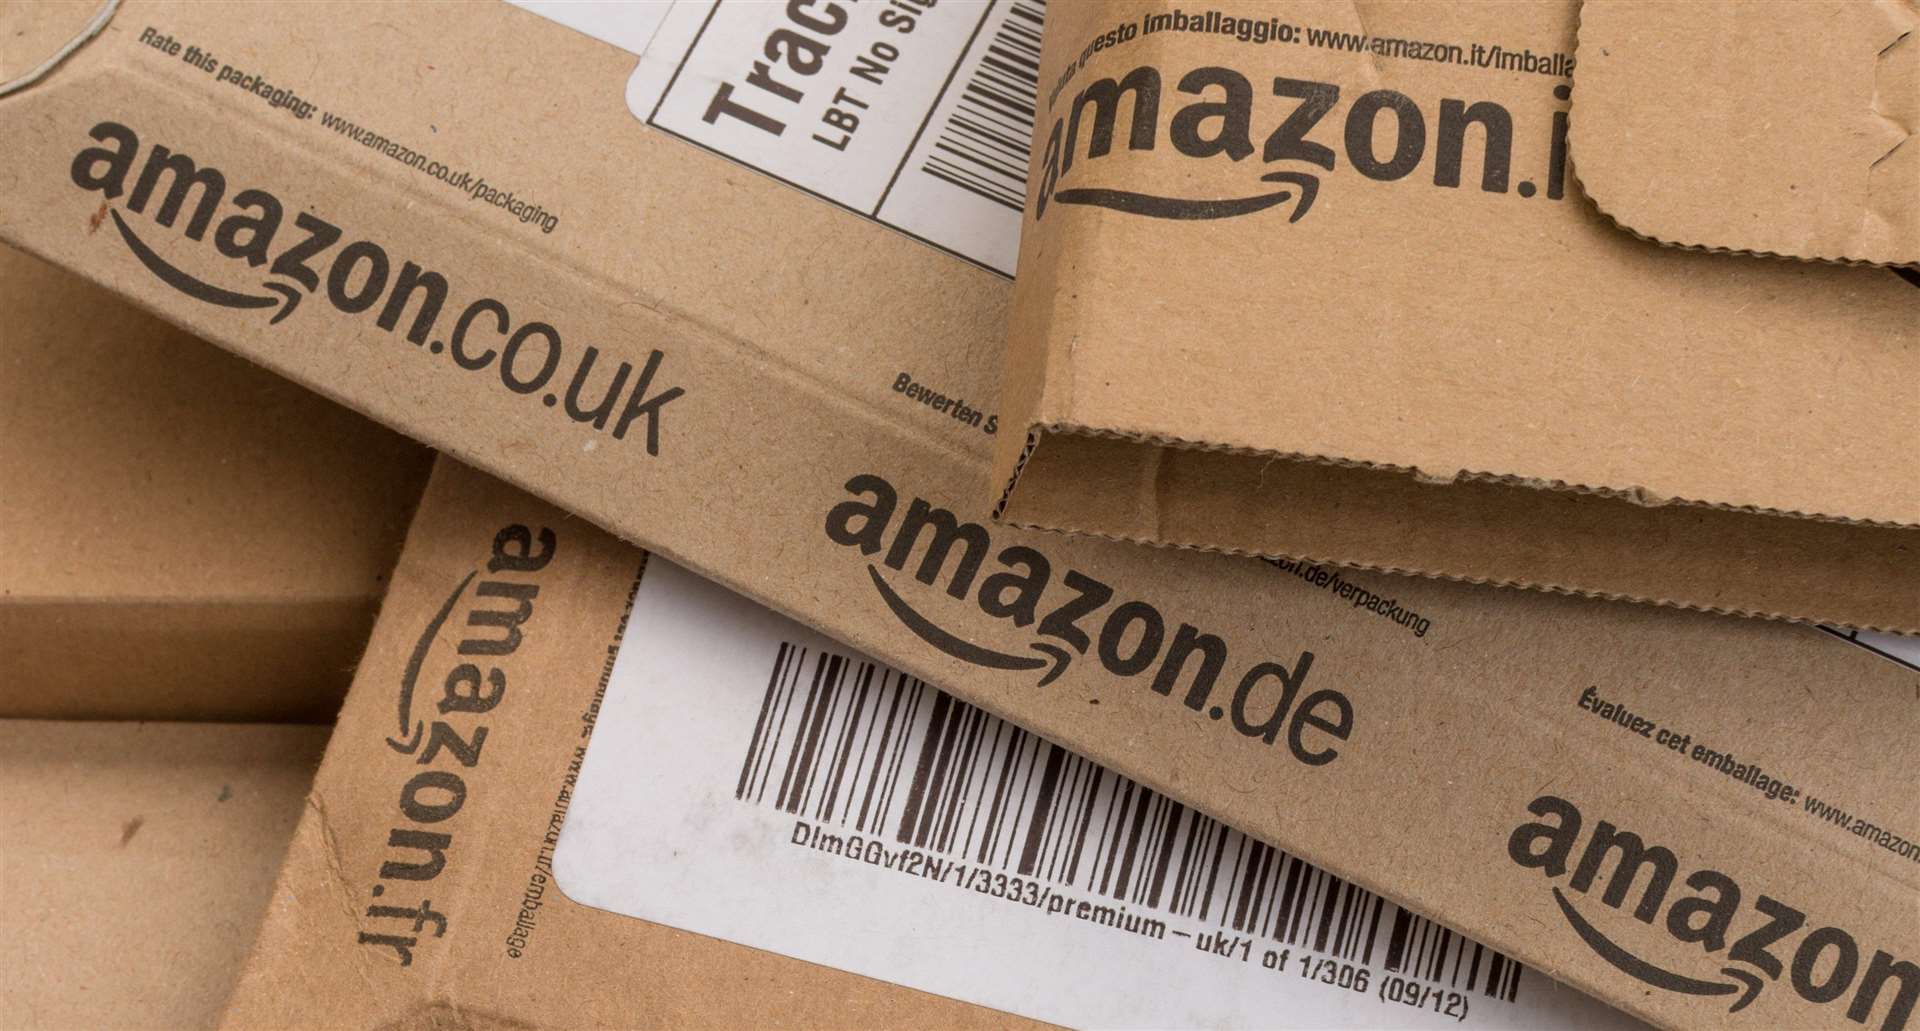 Amazon.co.uk country manager Doug Gurr: "We focus on making shopping as easy and enjoyable for the customer as possible."